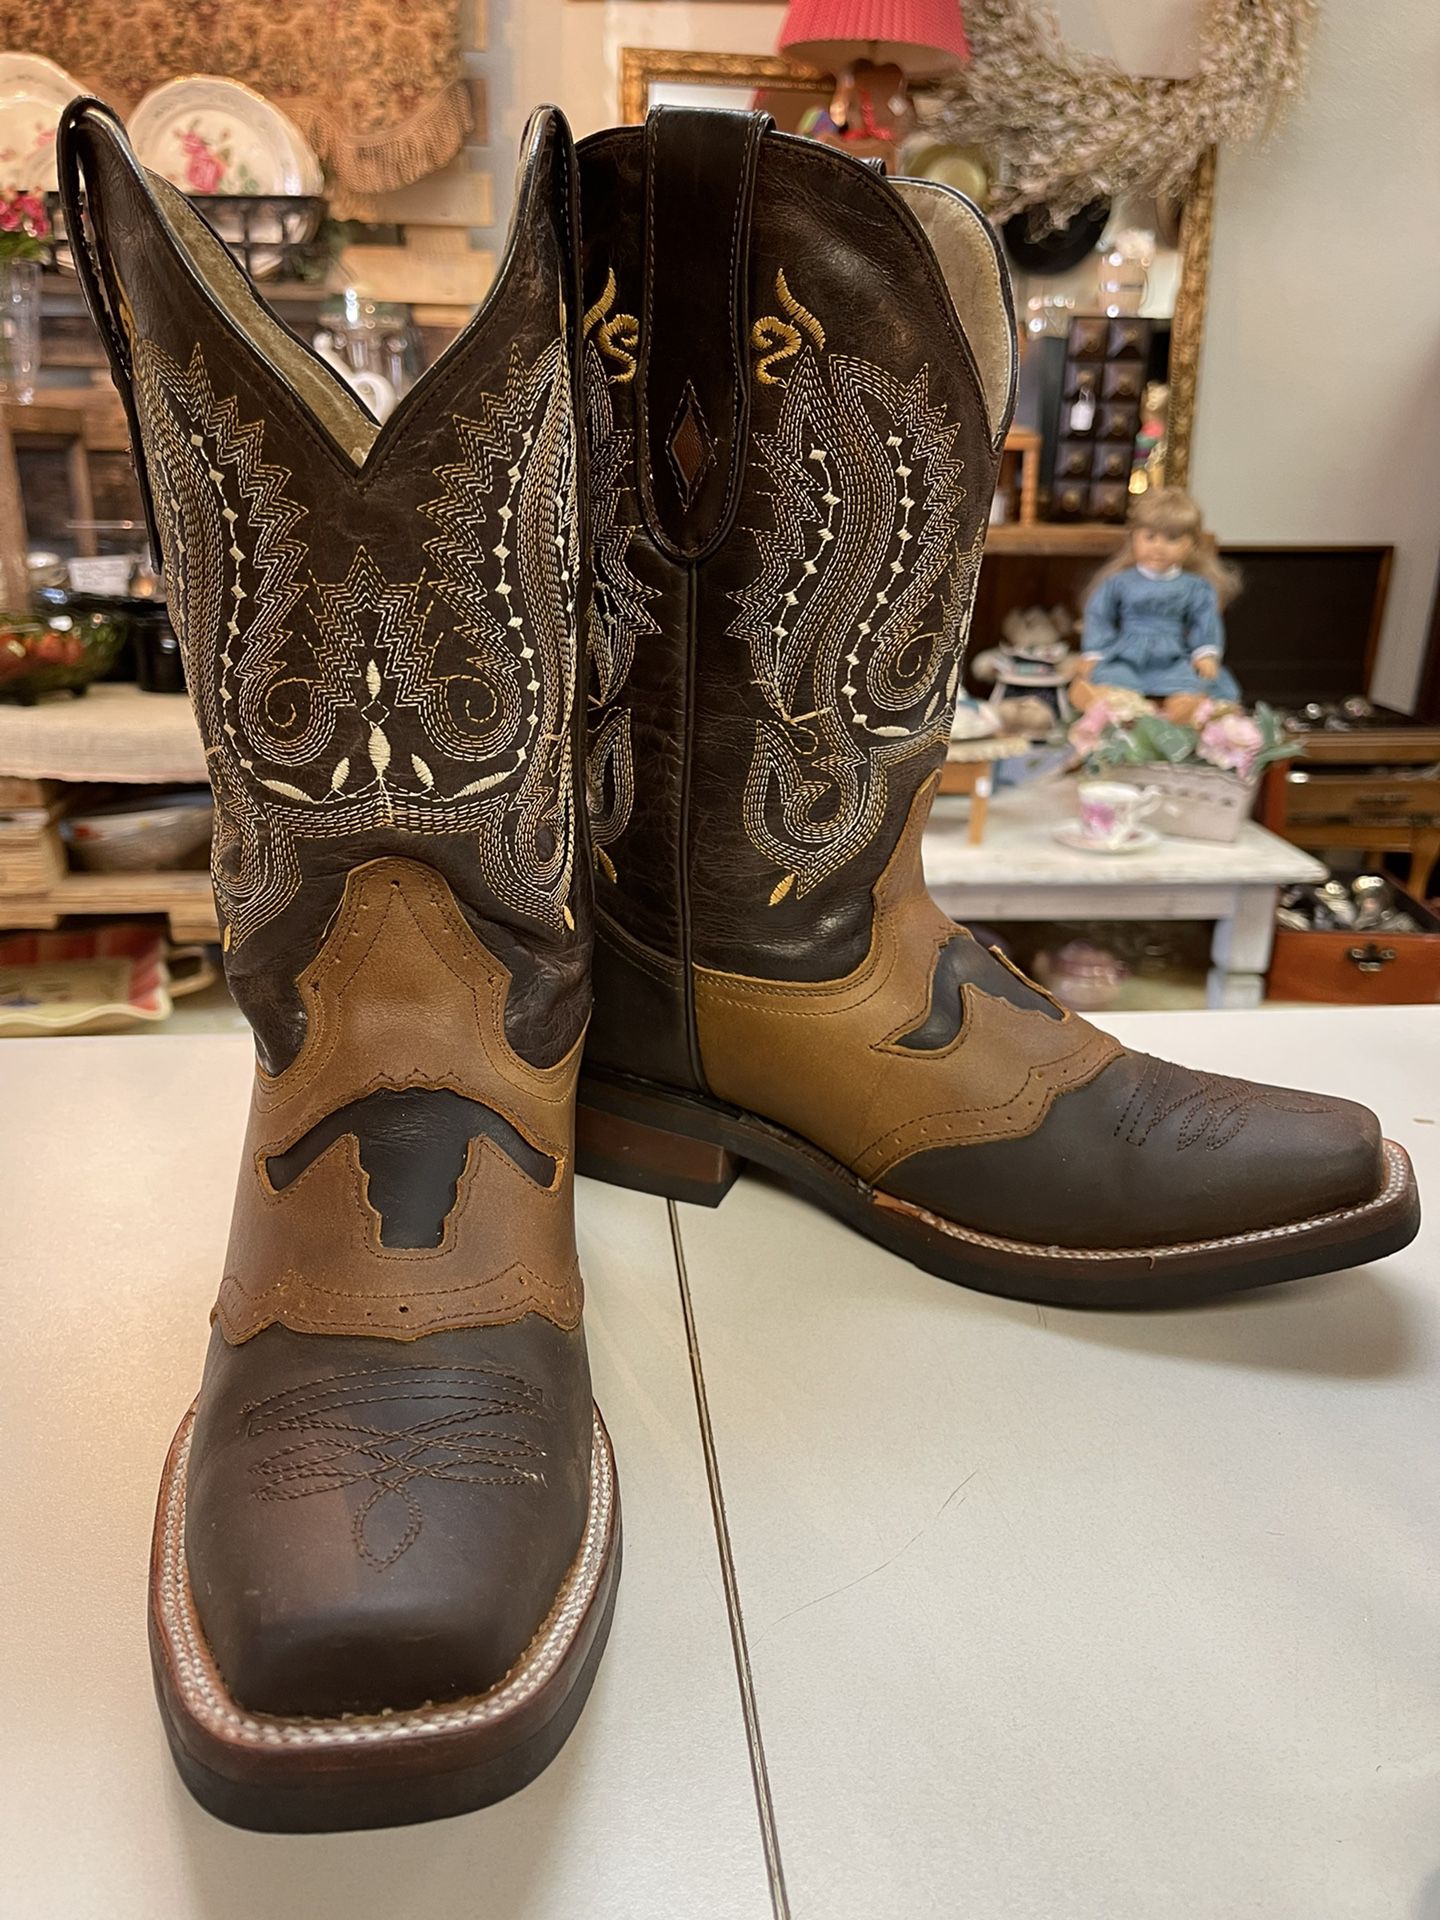 West Wings Boots Men's Size 7 Black/Brown Leather Western Cowboy Boots